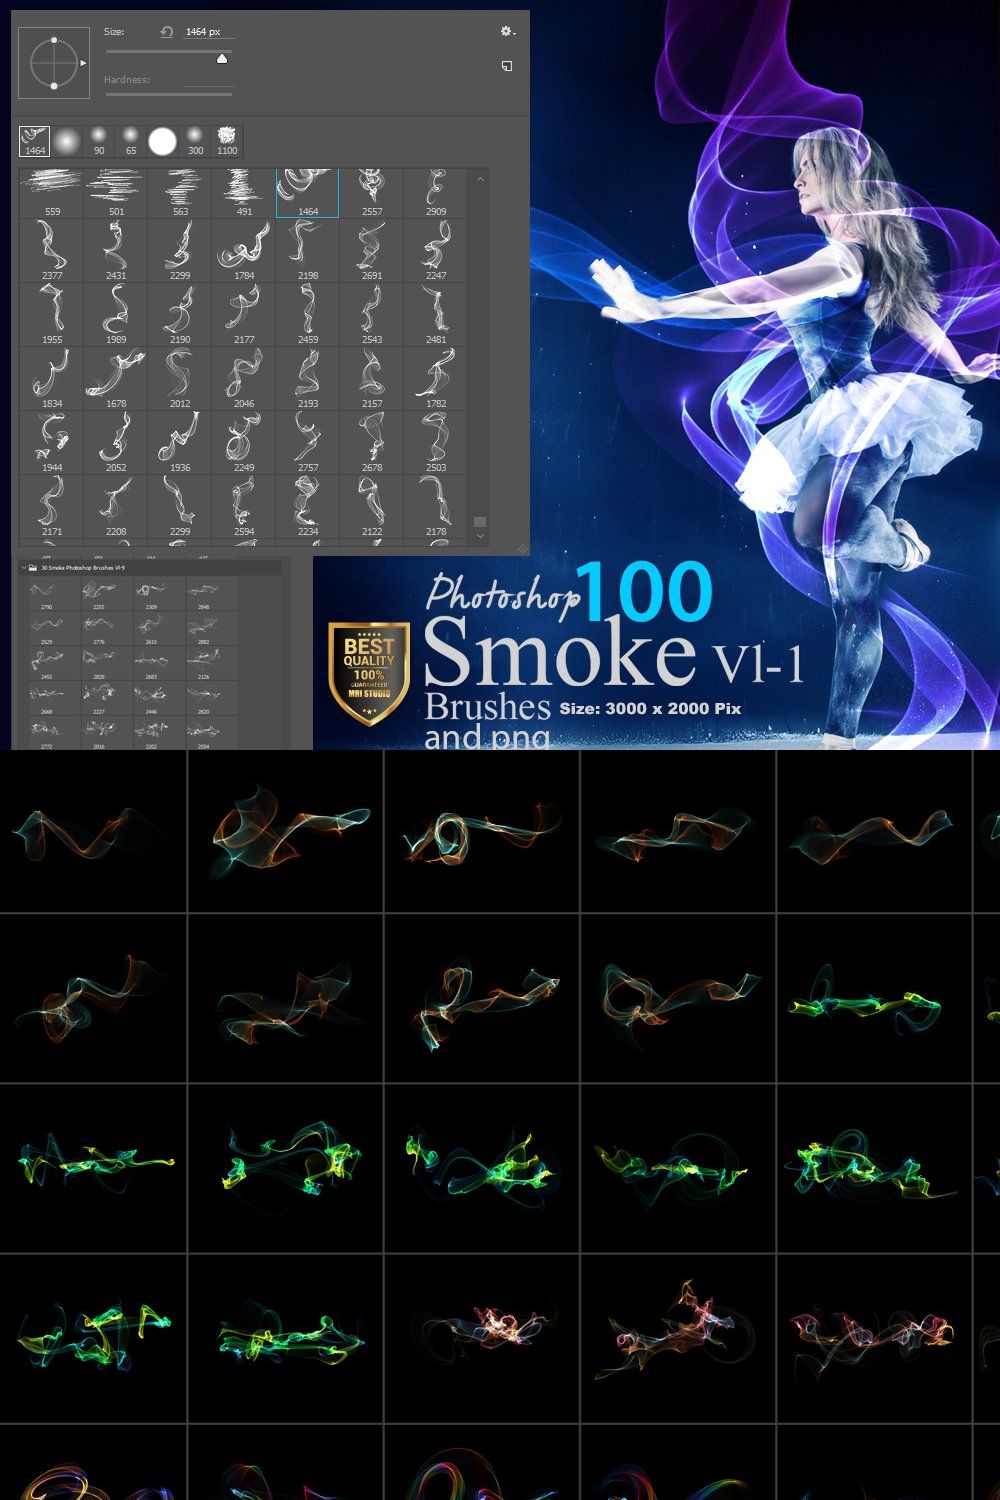 Smoke Photoshop Brushes pinterest preview image.